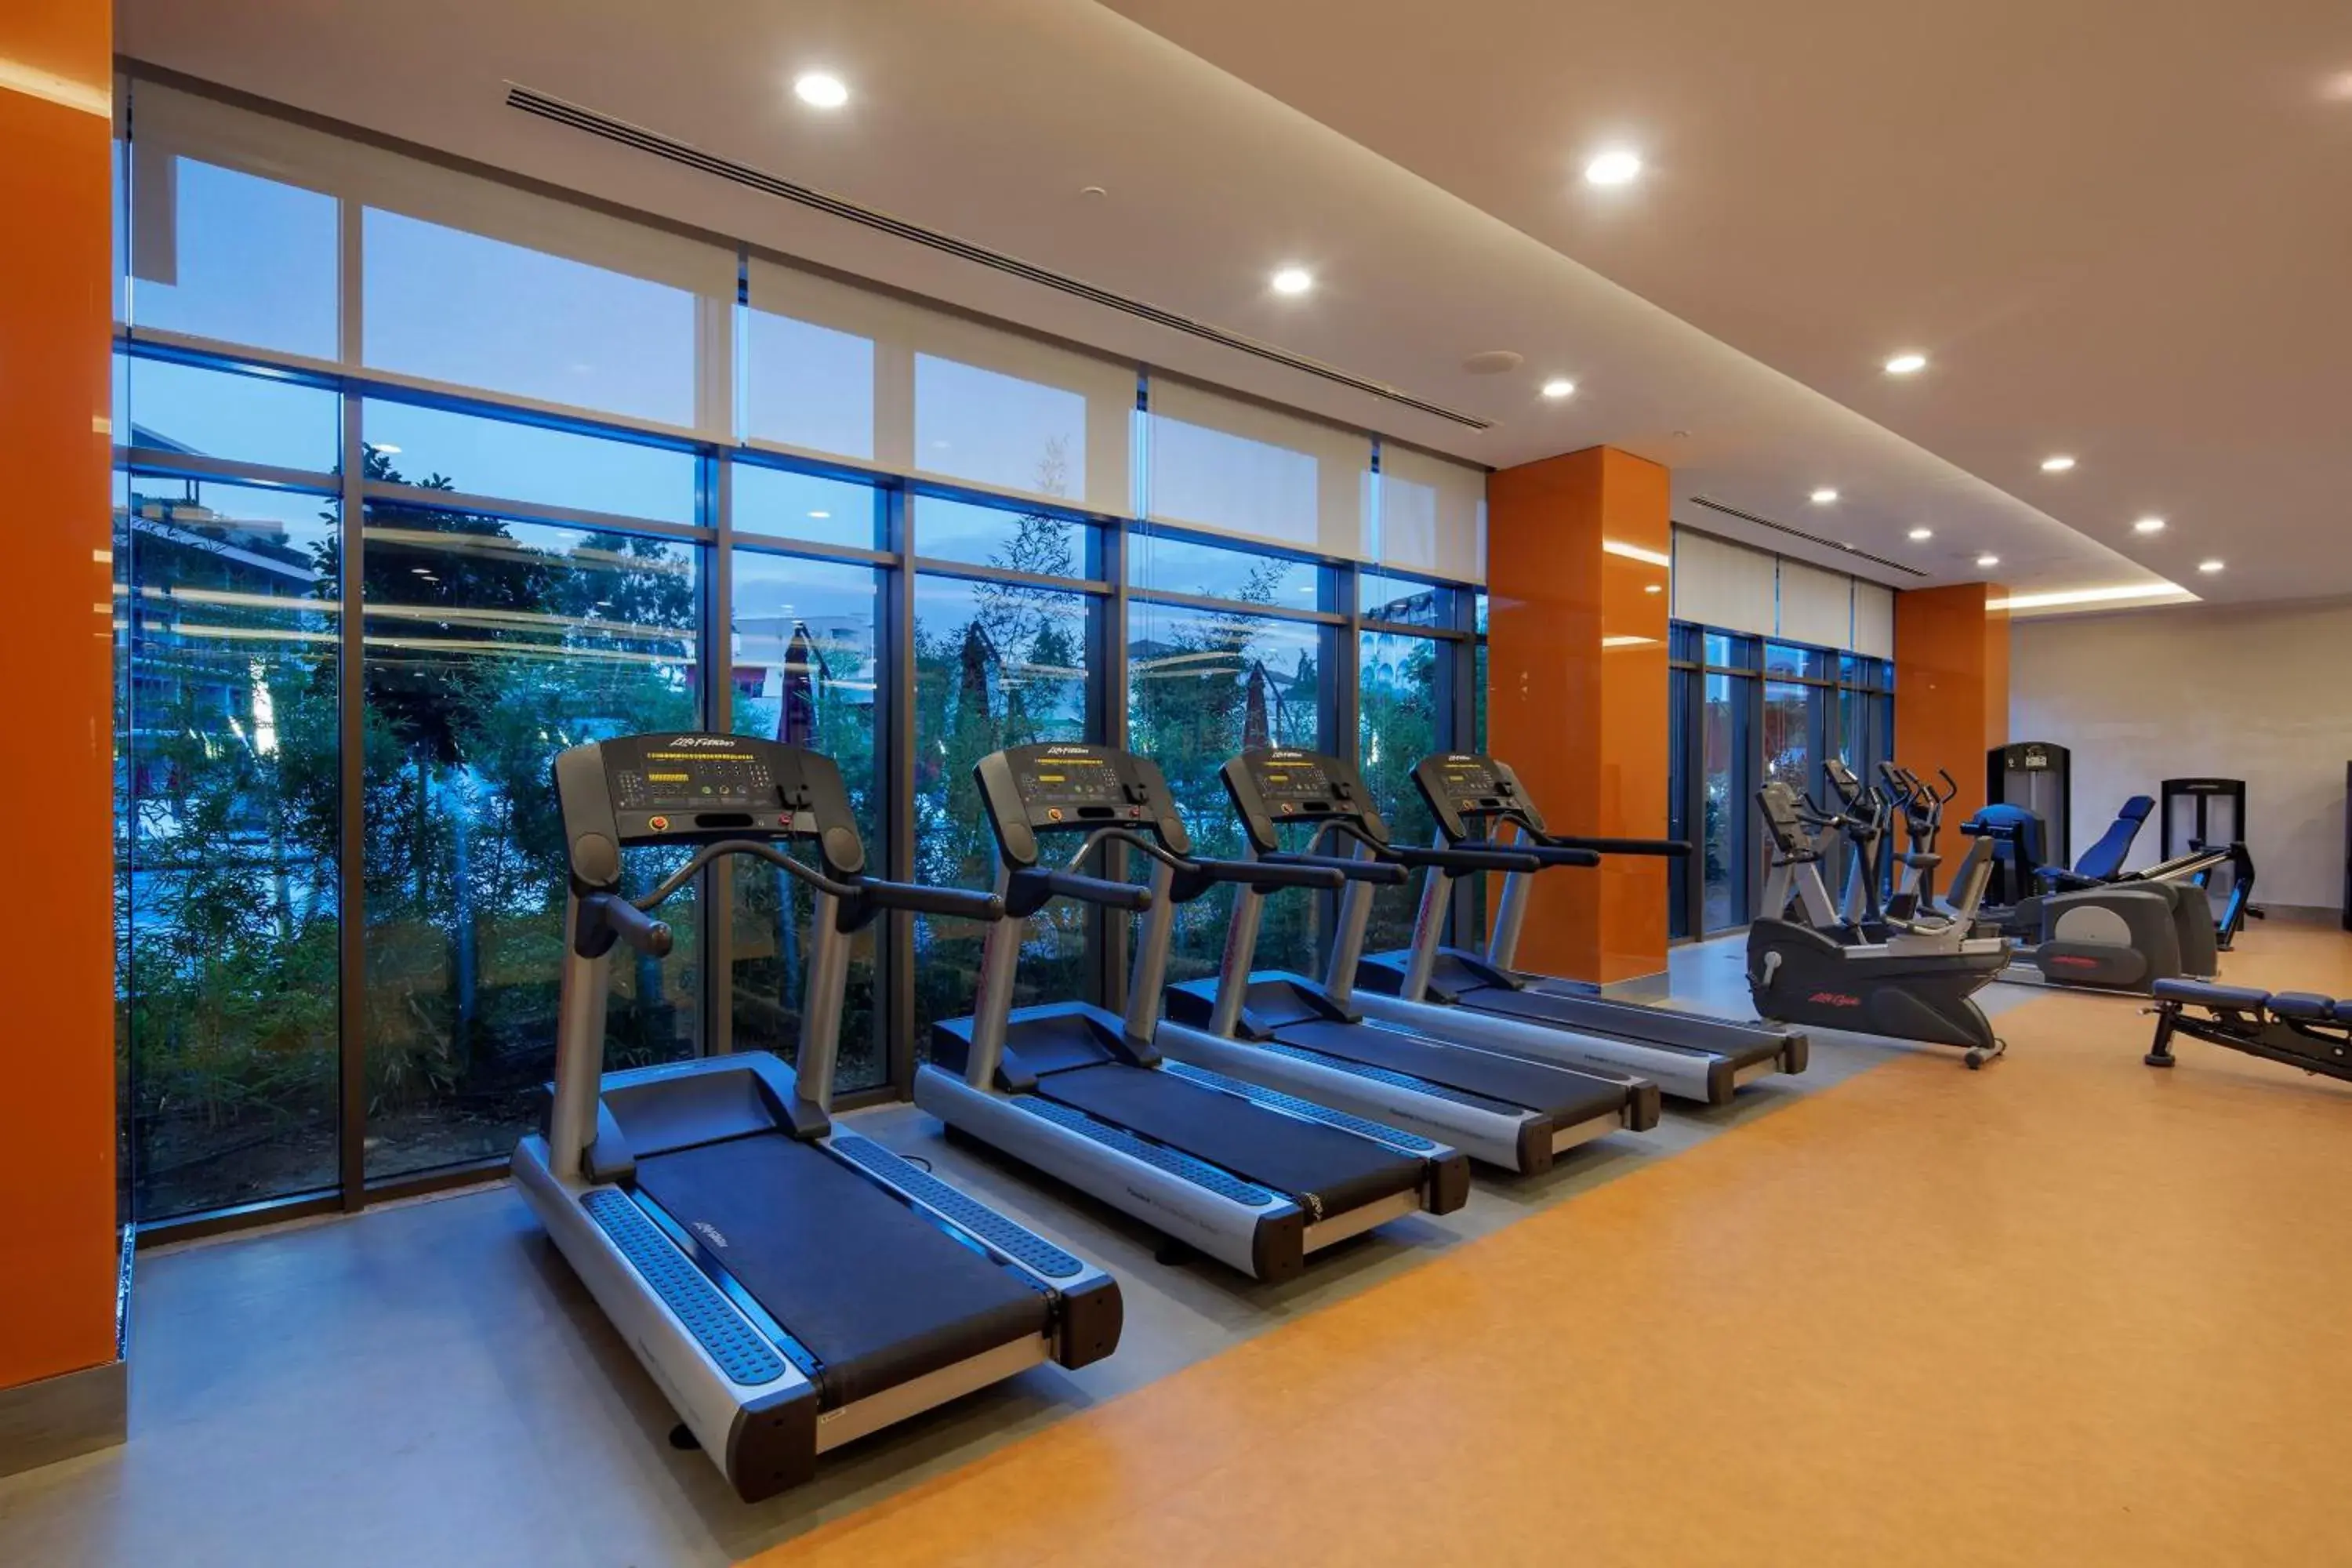 Fitness centre/facilities, Fitness Center/Facilities in The Sense Deluxe Hotel